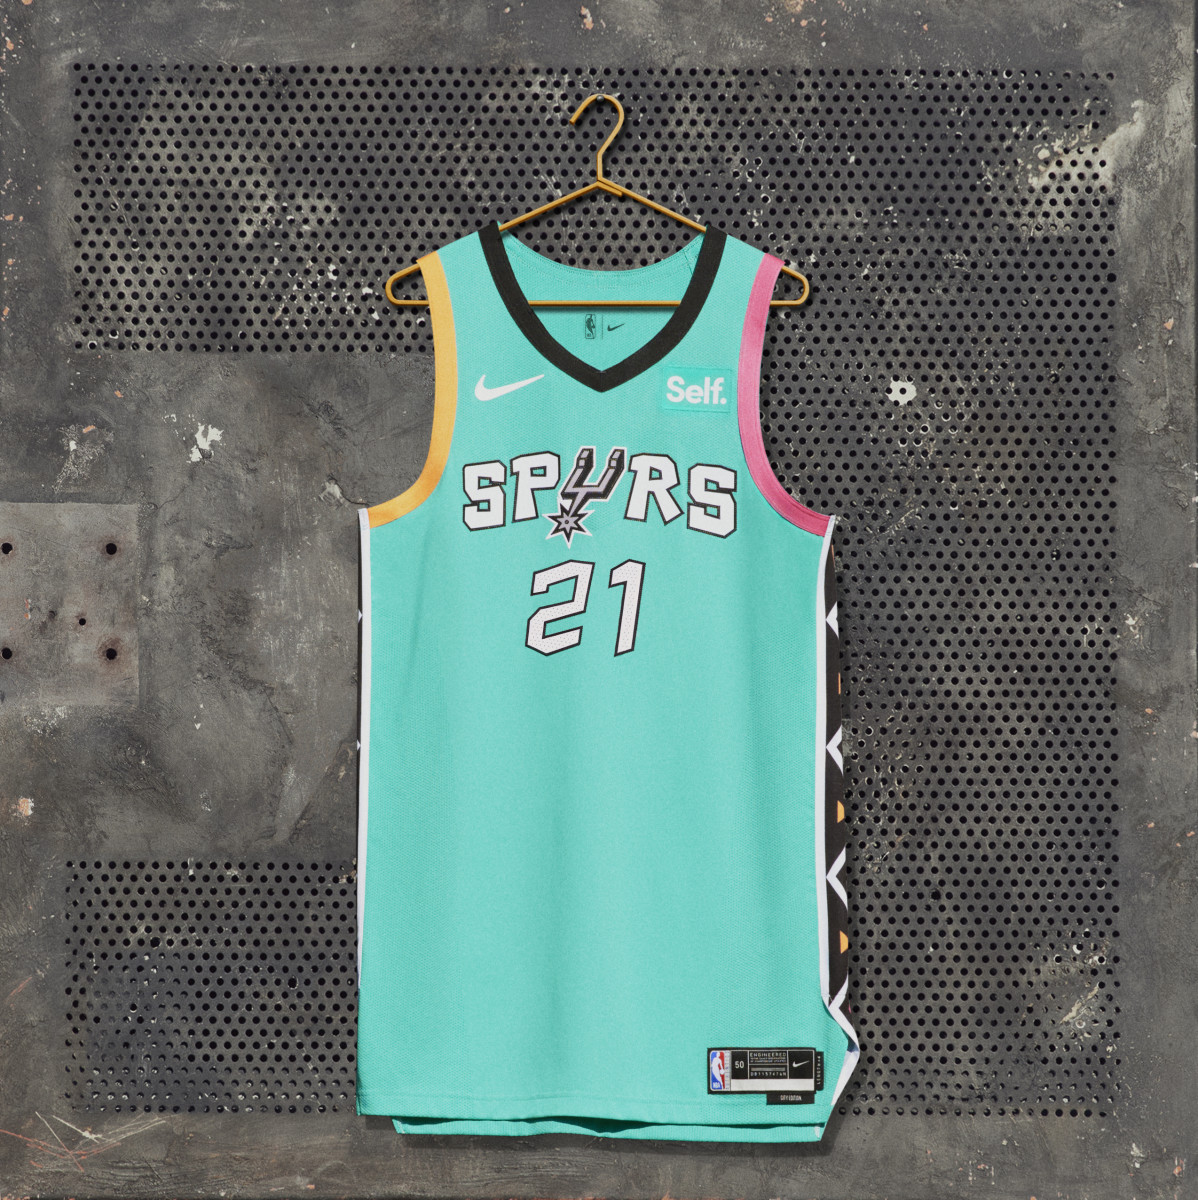 A Ranking of the 2021-22 NBA City Edition Jerseys – The Rangeview